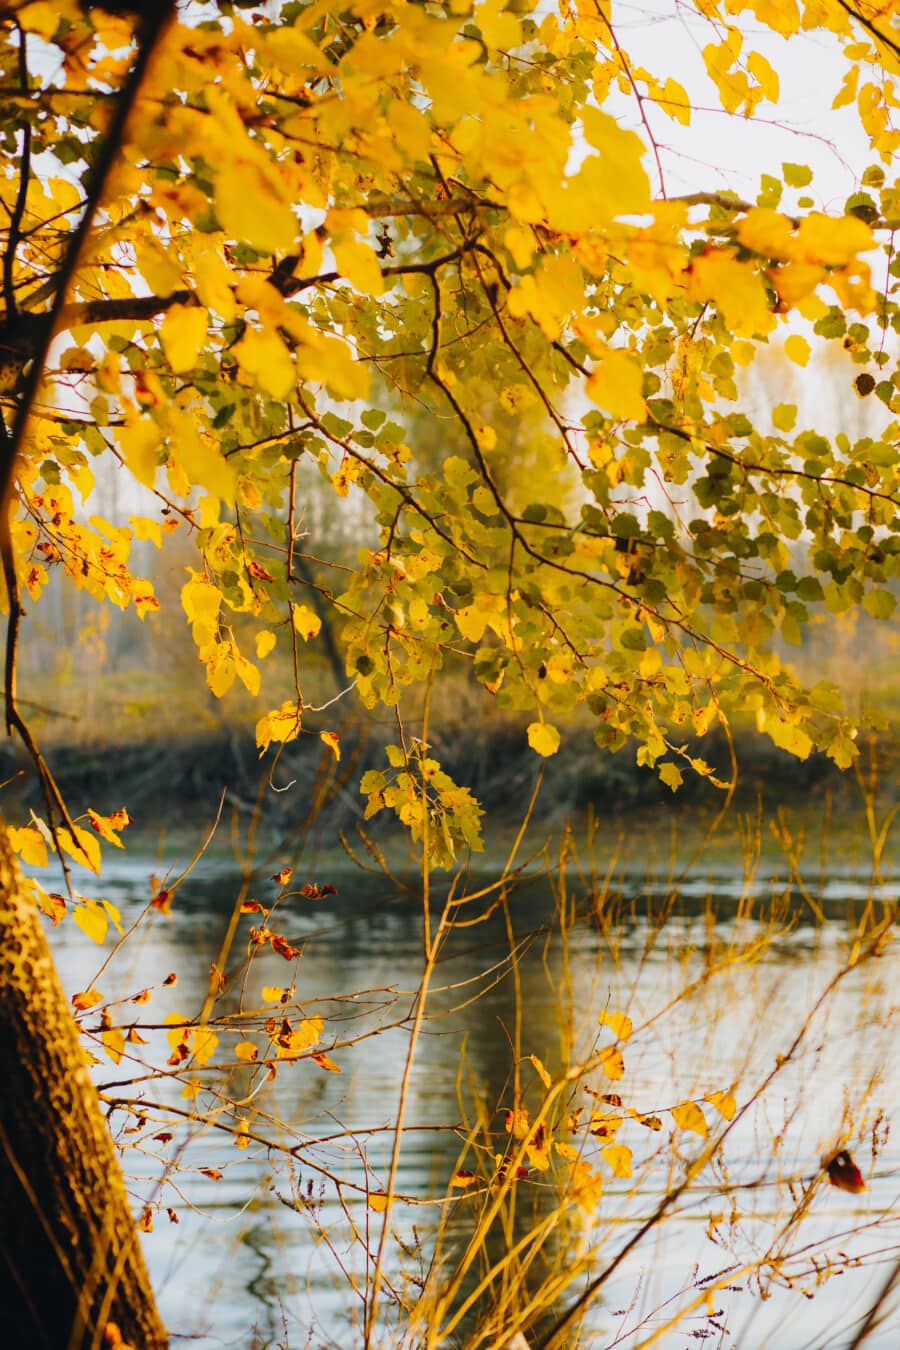 yellowish brown, leaves, bright, branches, tree, riverbank, foliage, yellow, forest, poplar